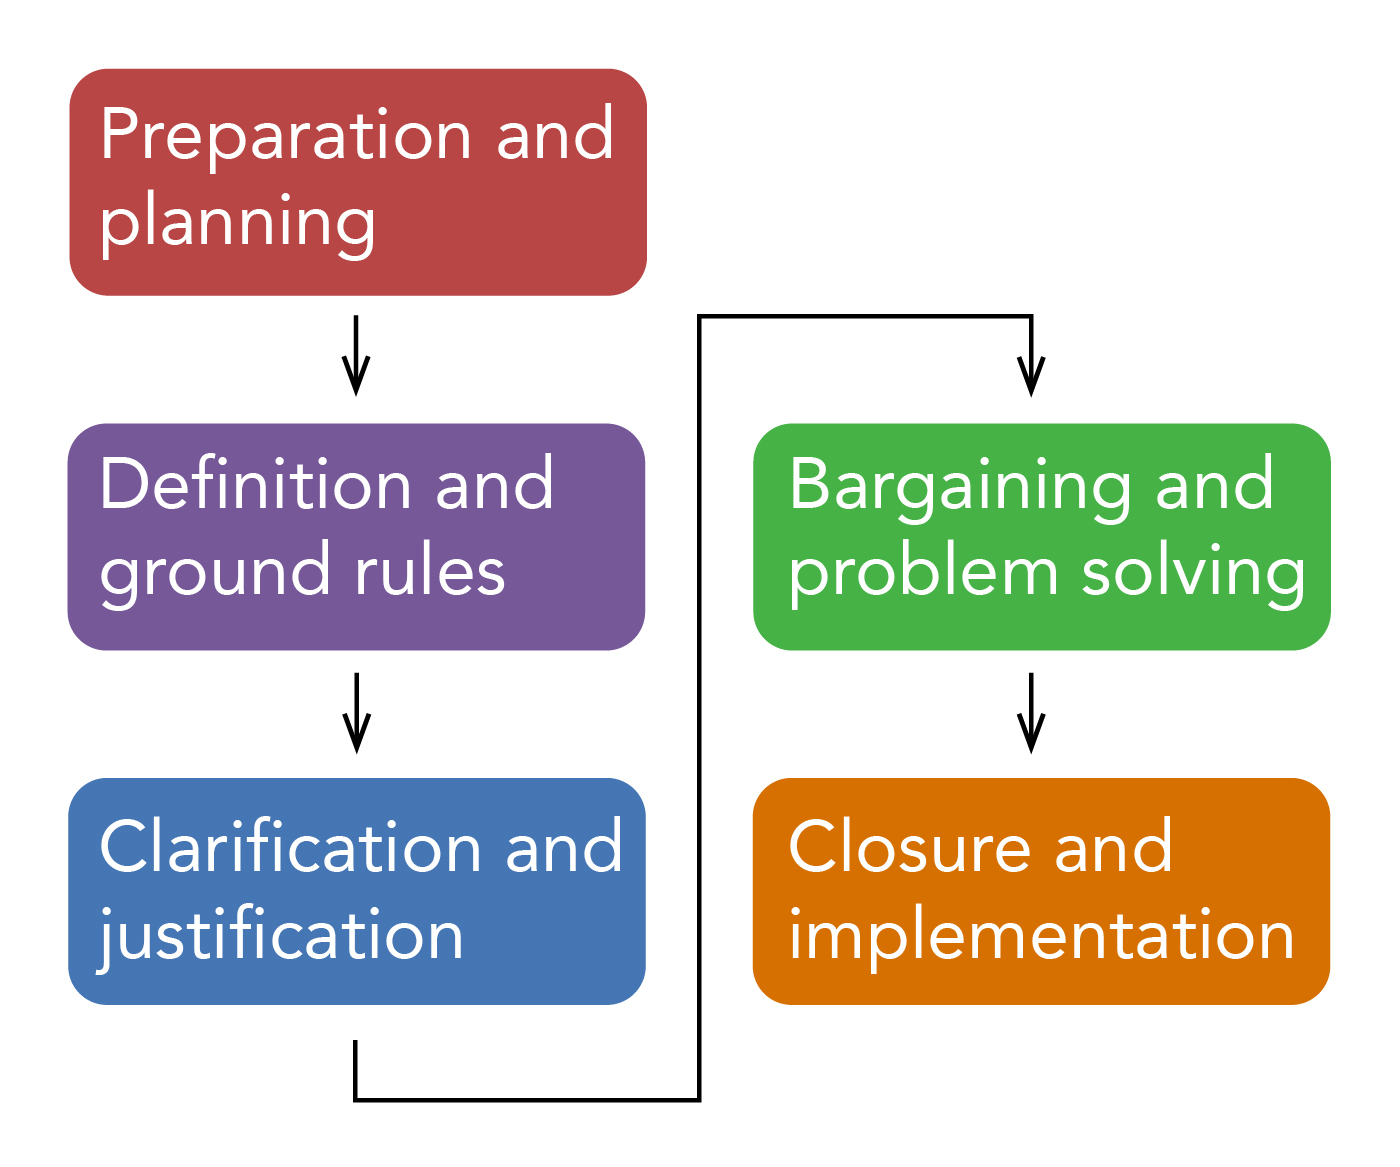 First: Preparation and planning. Second: Definition and ground rules. Third: Clarification and justification. Fourth: Bargaining and problem solving. Fifth: Closure and implementation.